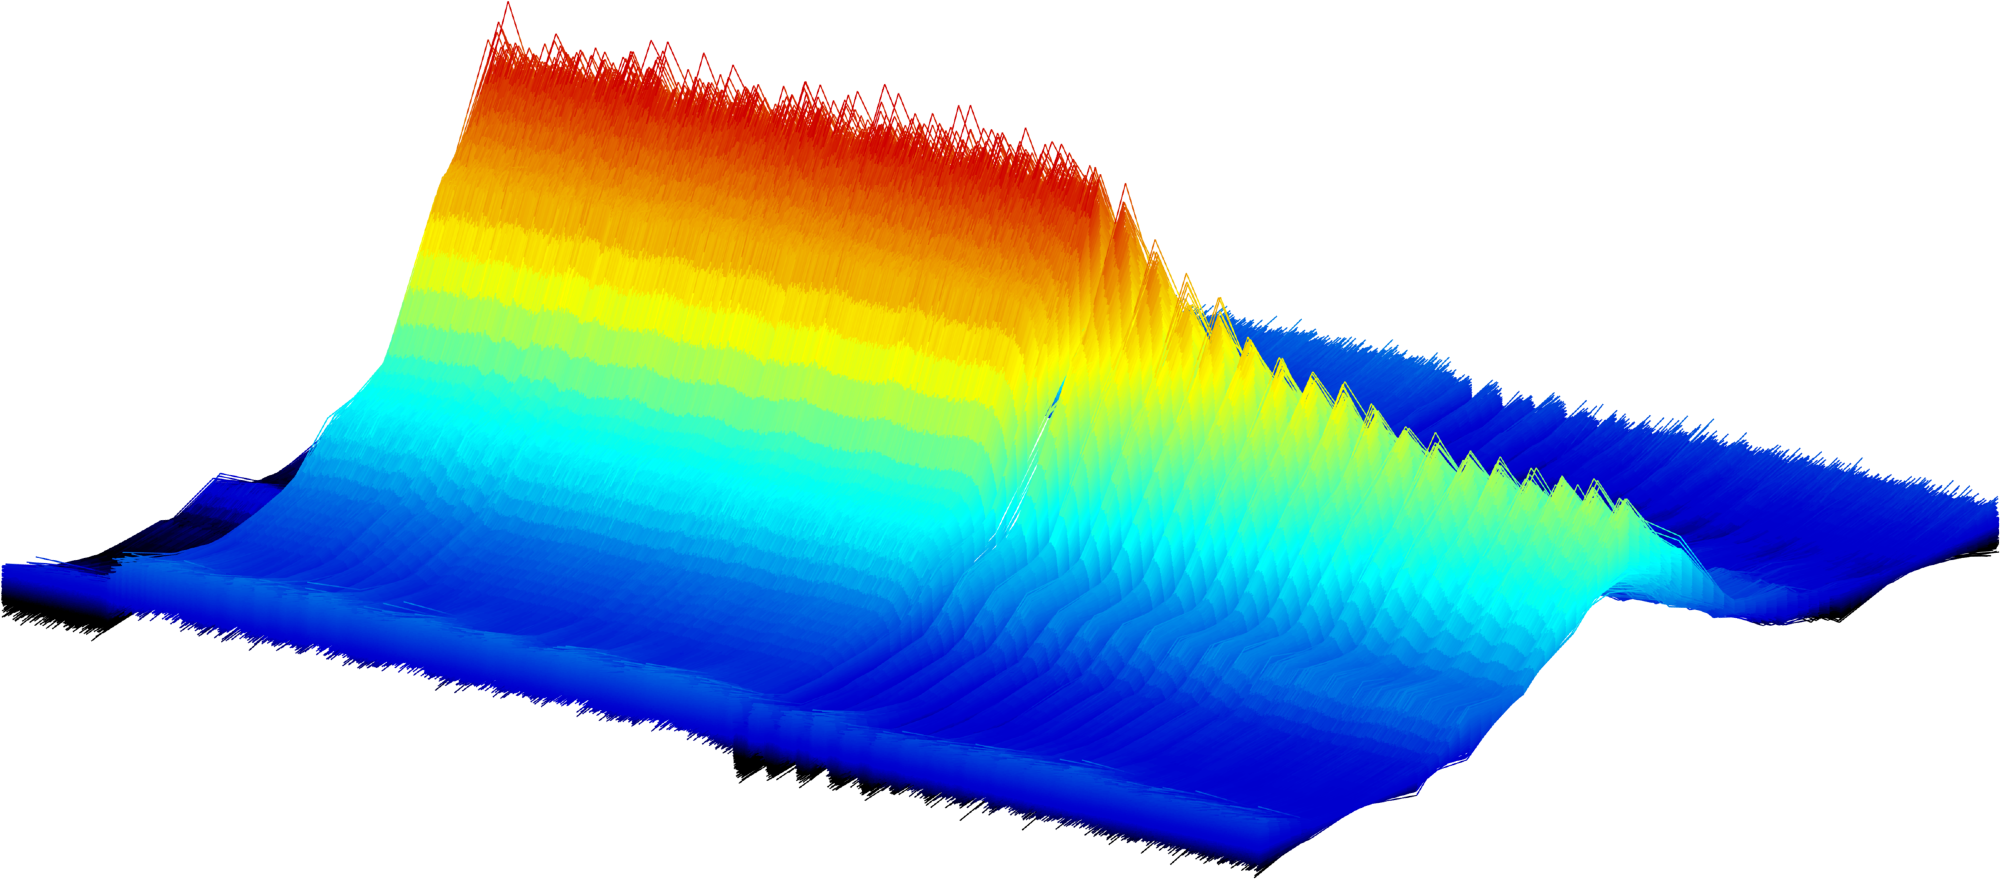 Capturing High-Speed Processes with New Frequency Comb